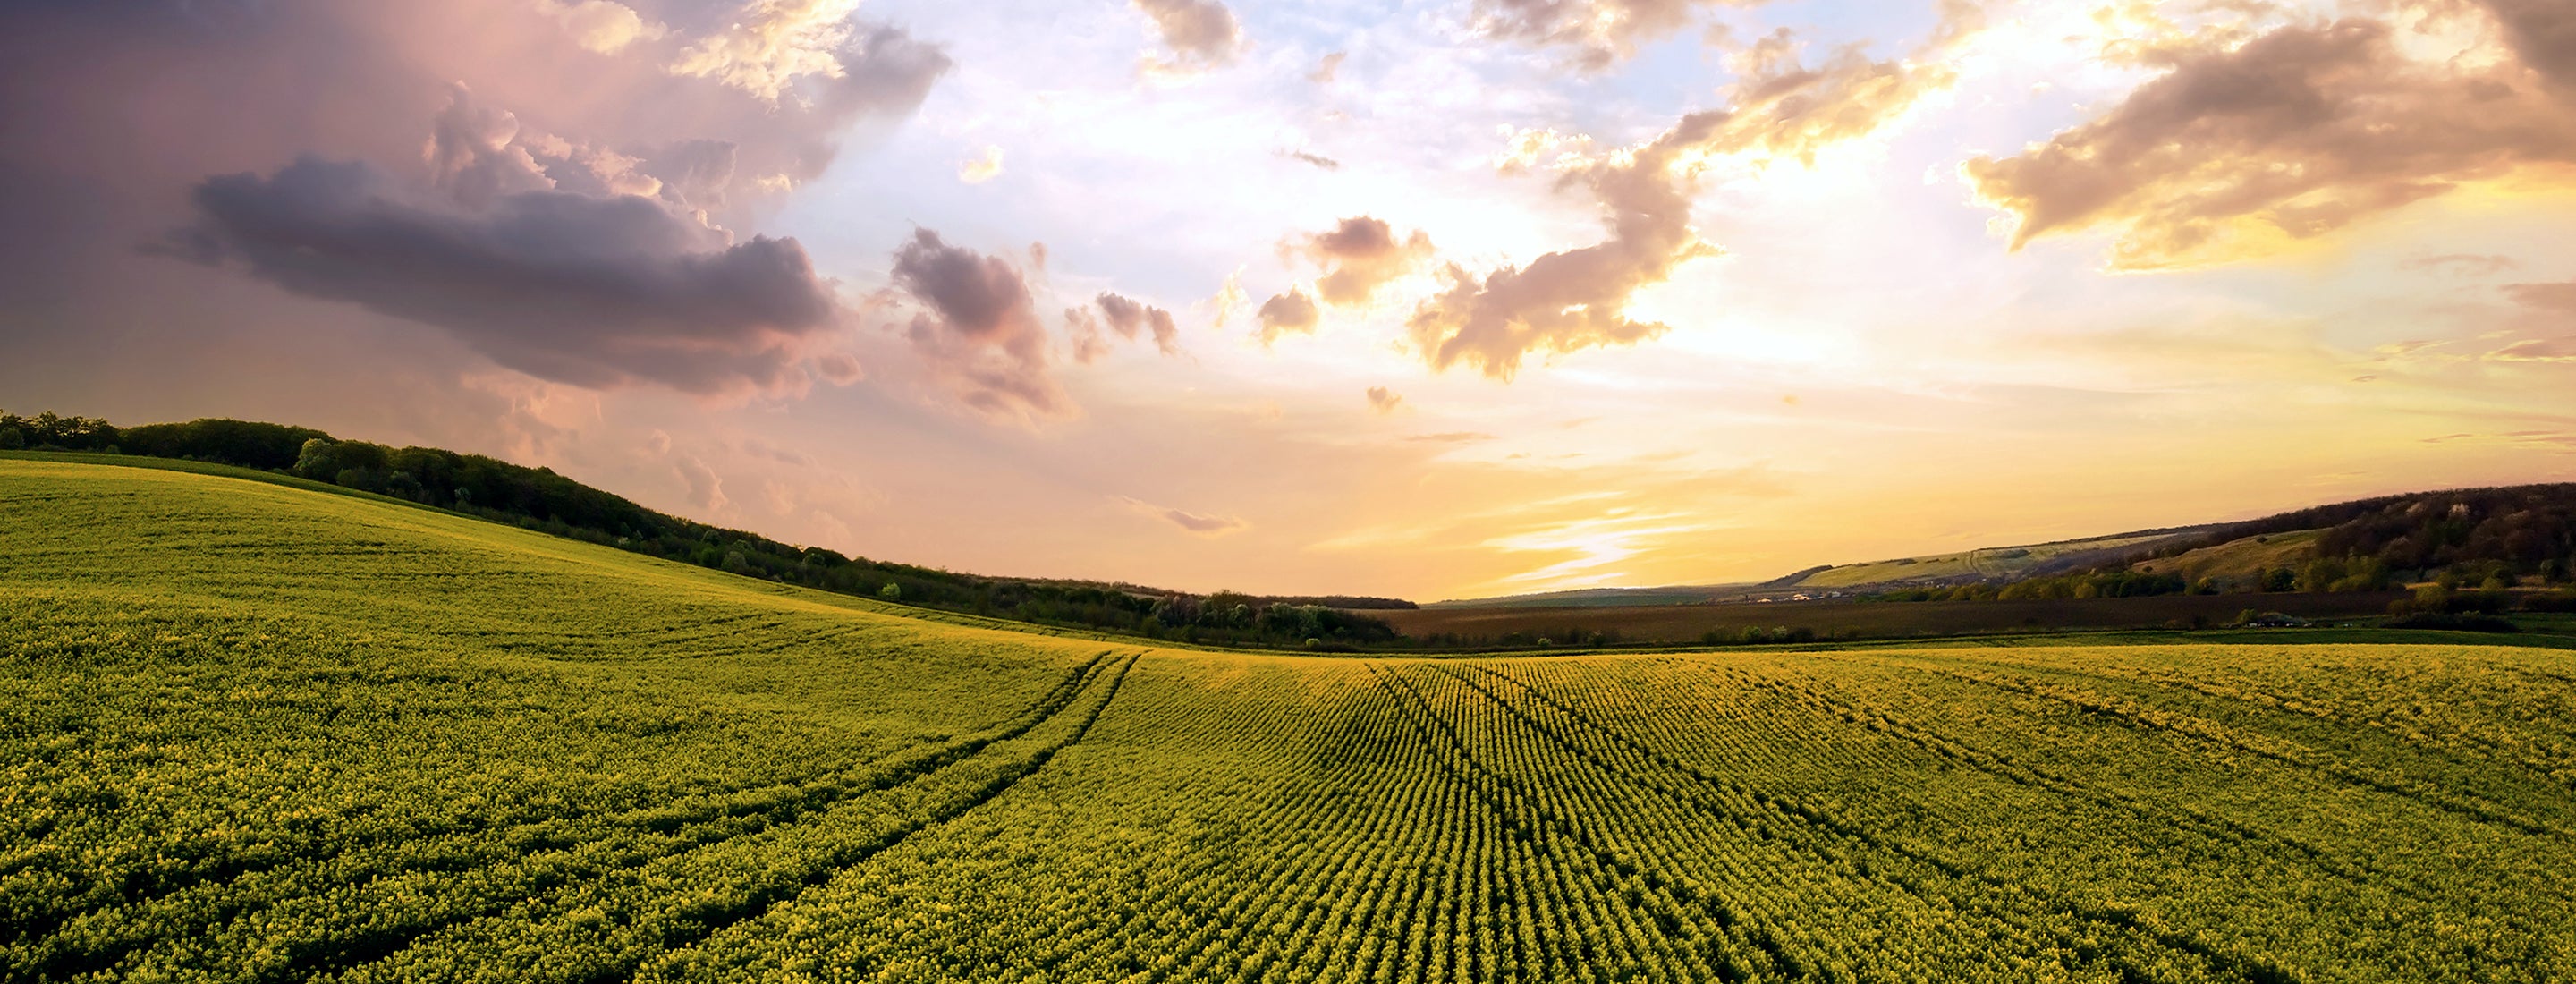 Banner image of green field and sunset sky shown.